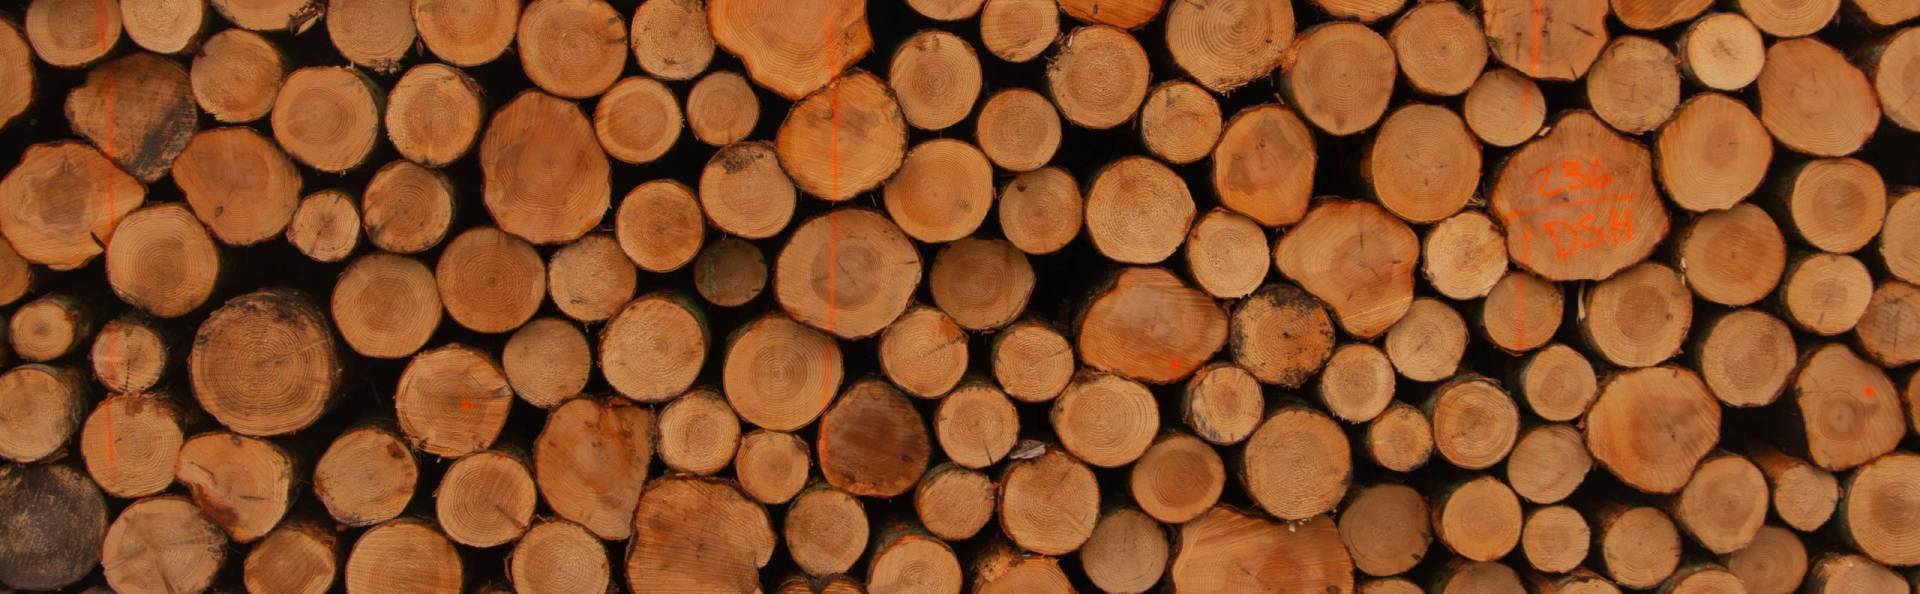 AT DSHWOOD, WE PURCHASE & SUPPLY ALL MAJOR SPECIES OF HARDWOOD, SOFTWOOD AND BIOMASS